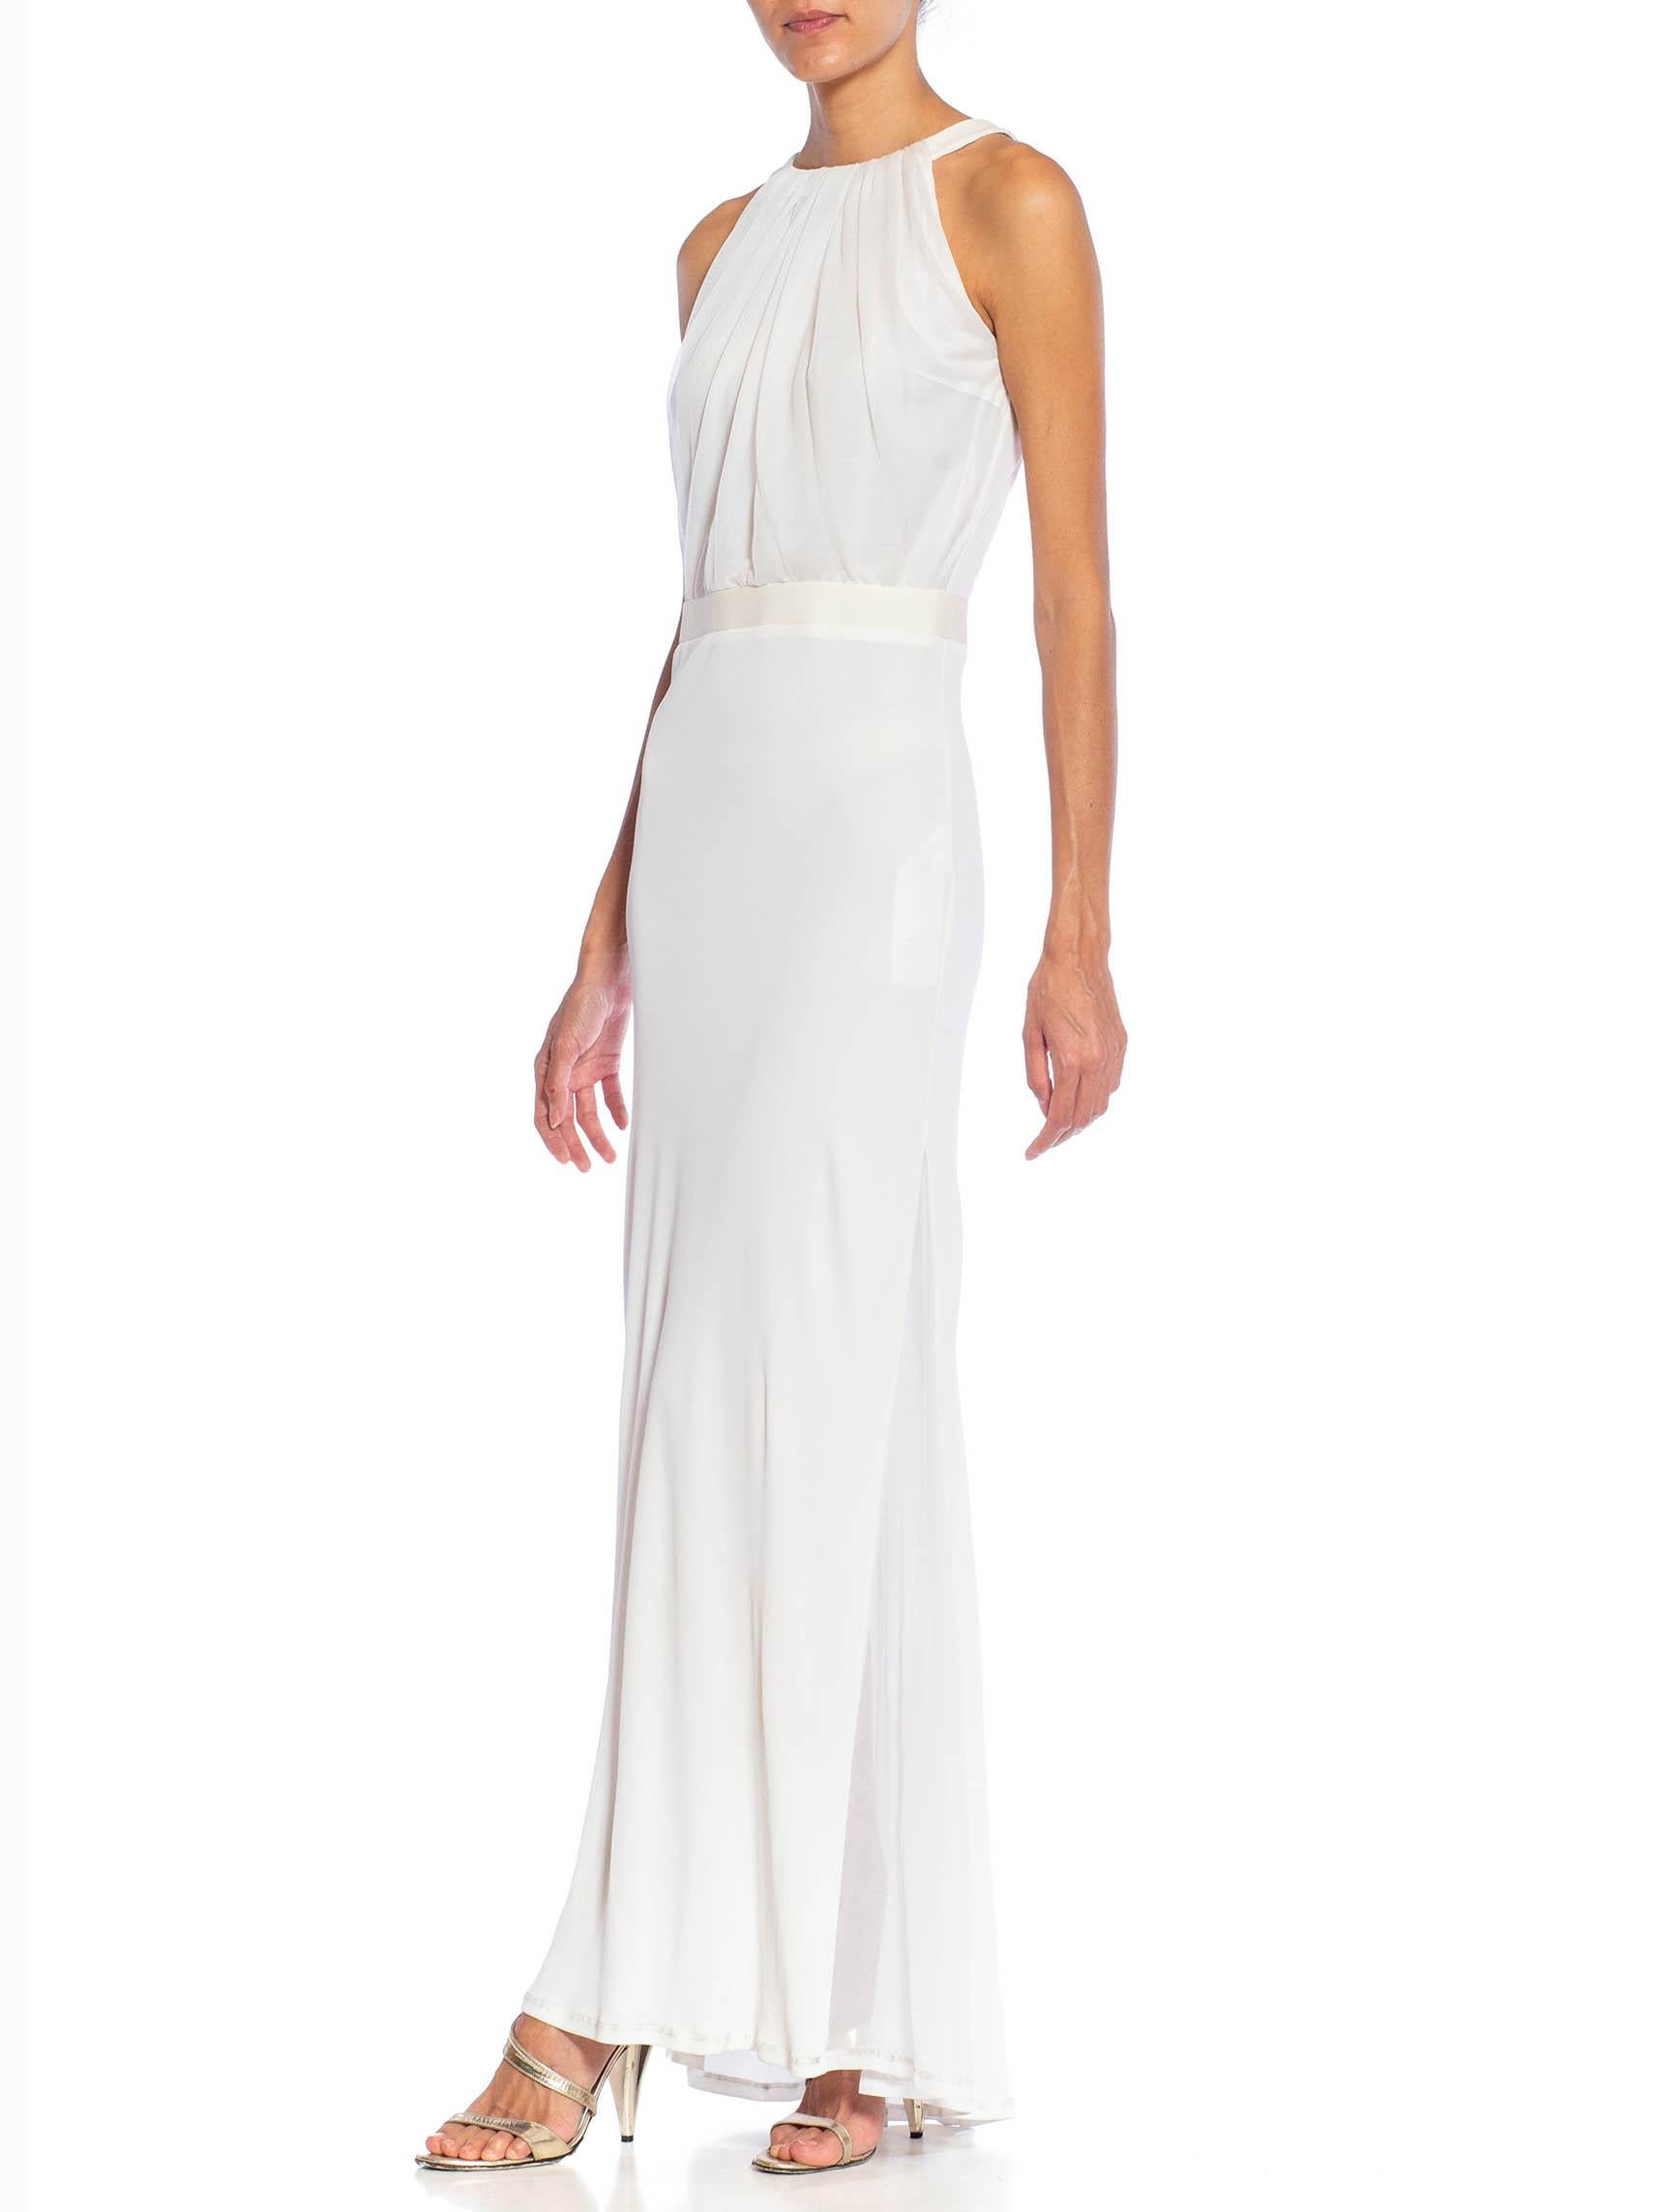 2000S EMILIO PUCCI White Viscose Blend Jersey Gown For Sale 1